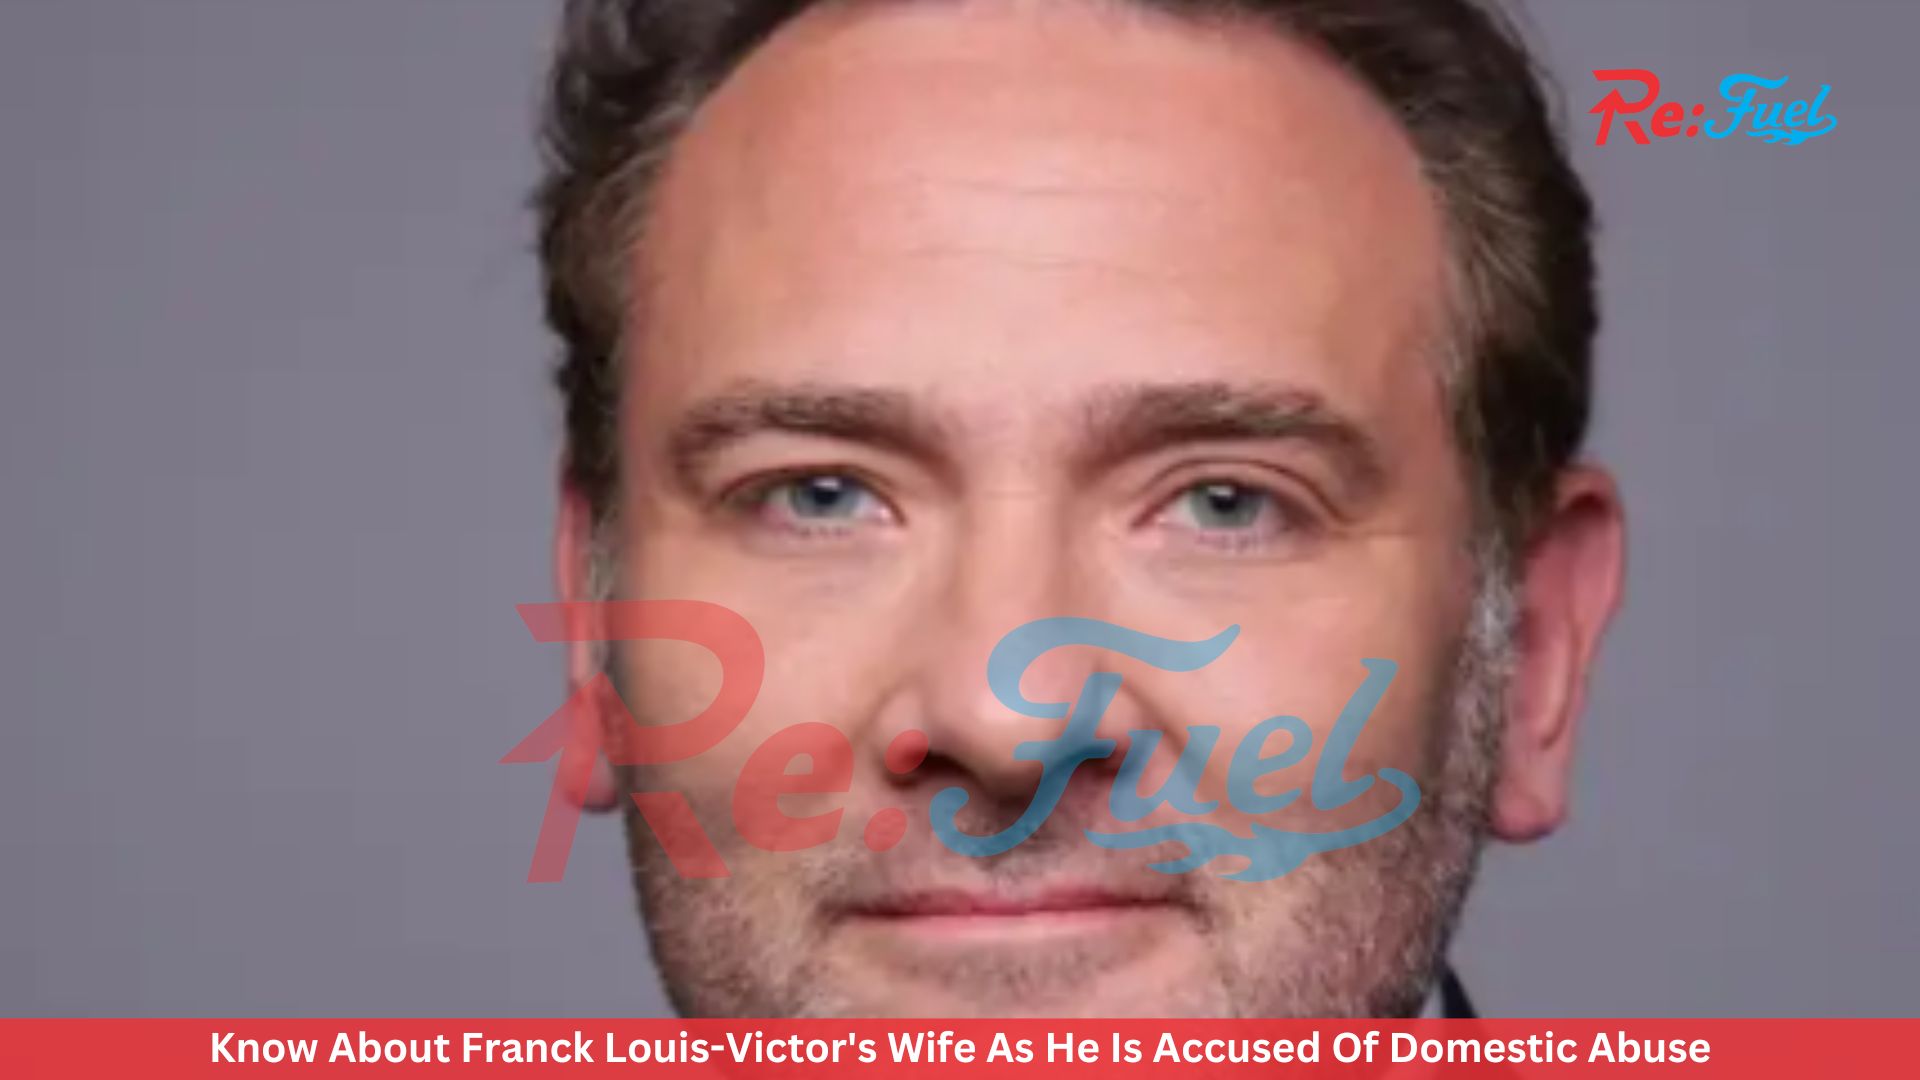 Know About Franck Louis-Victor's Wife As He Is Accused Of Domestic Abuse